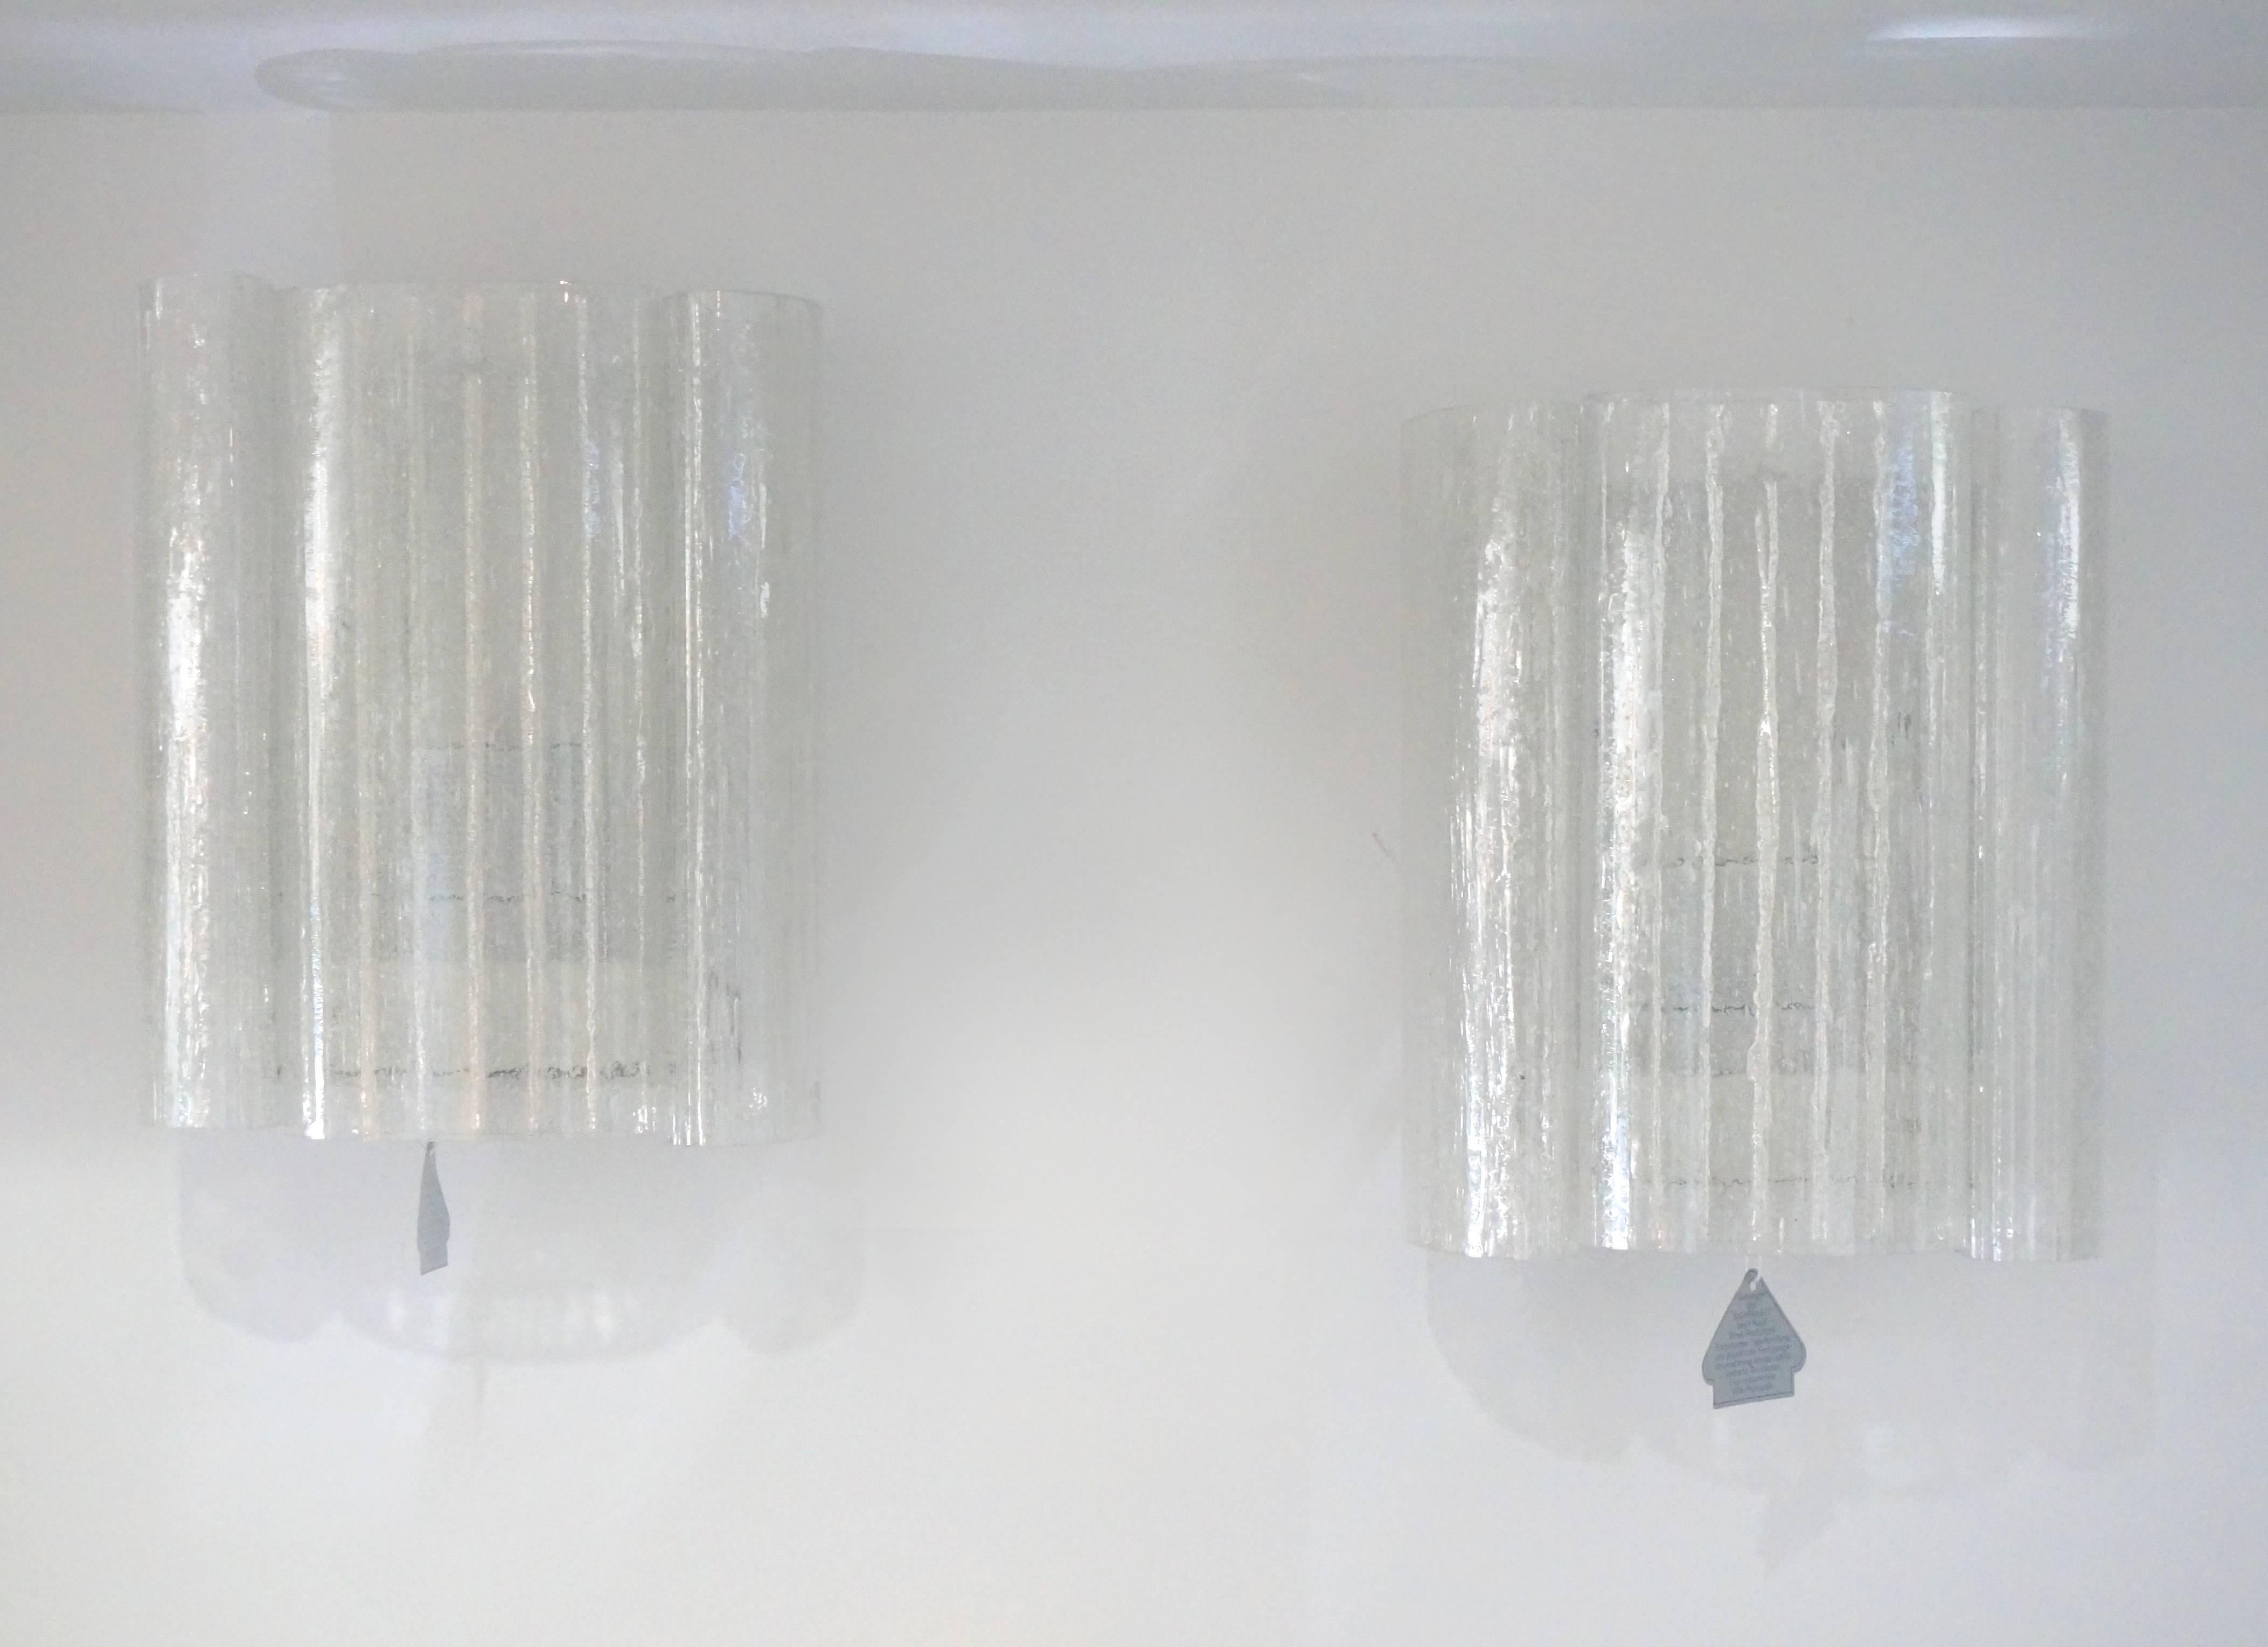 This pair of wall sconces date from the 1960s and were manufactured by the iconic firm of Doria Leuchten. Each sconce has three molded-glass sections with an eisglas texture to them. The glass sections are flat on the exterior and the interior has a